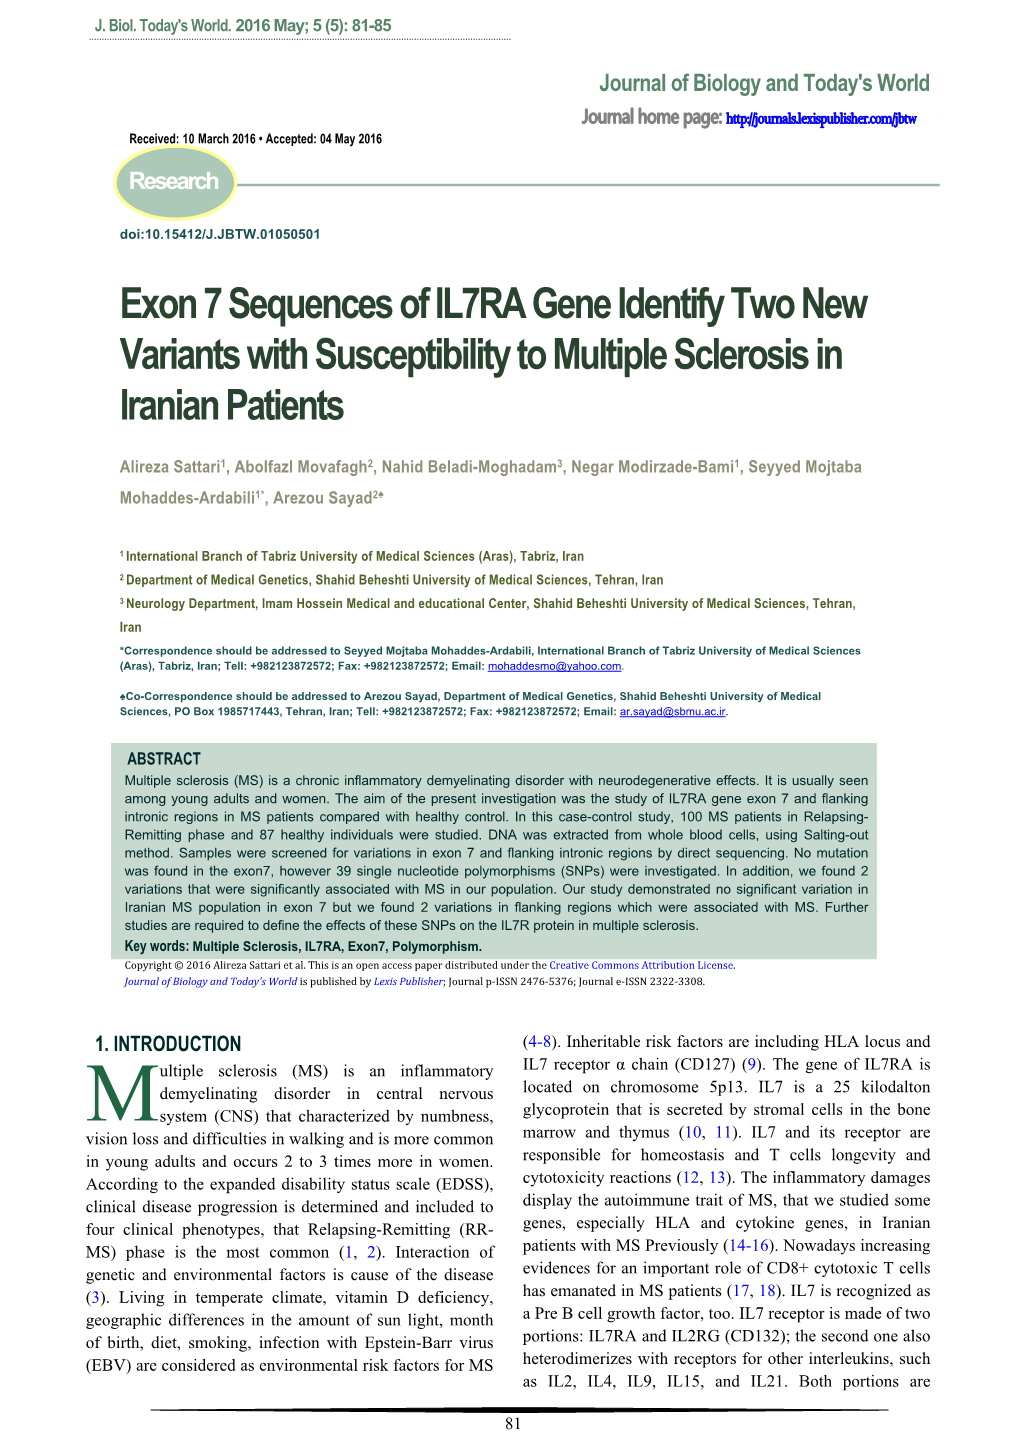 Exon 7 Sequences of IL7RA Gene Identify Two New Variants with Susceptibility to Multiple Sclerosis in Iranian Patients